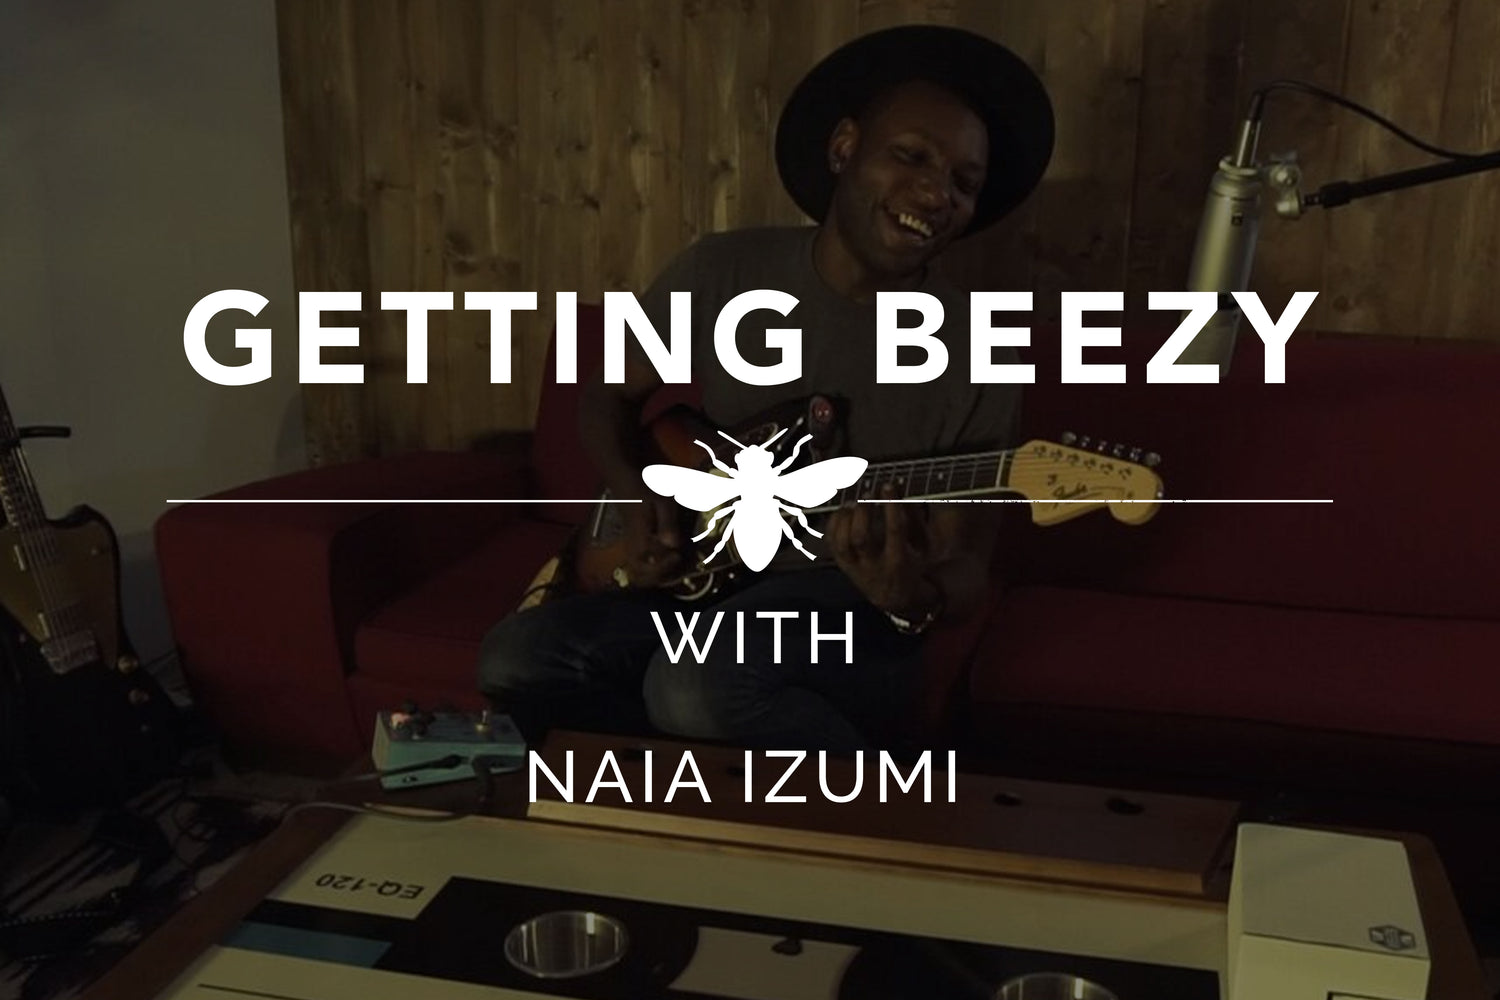 Getting Beezy with Naia Izumi